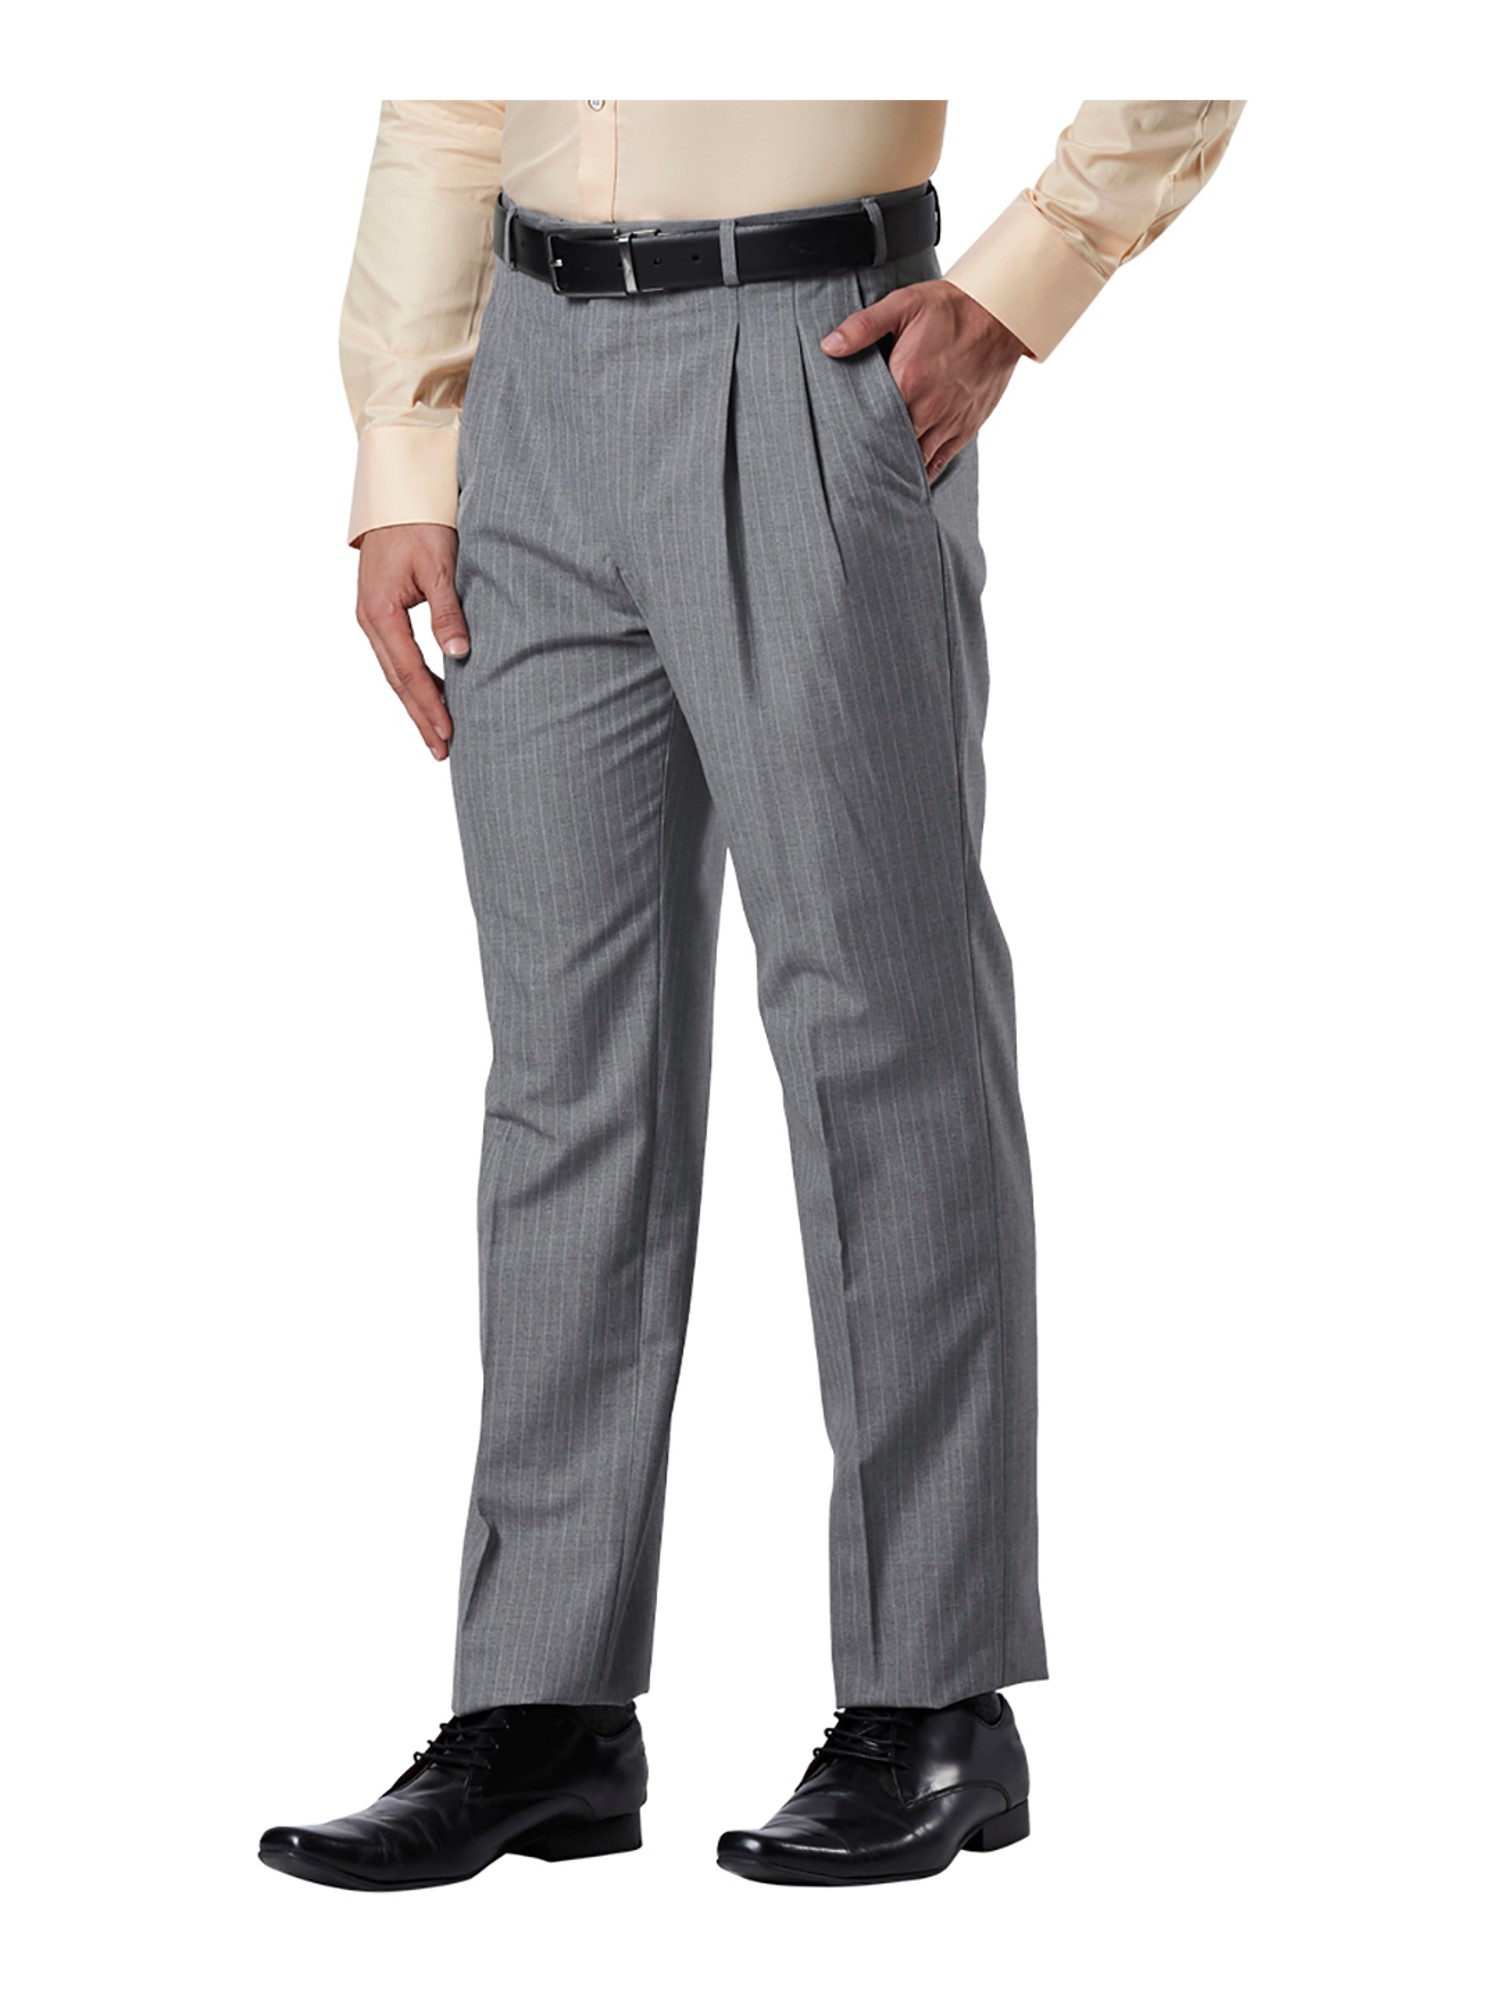 Buy Khaki Solid Comfort Fit Pleated Trousers online  Looksgudin